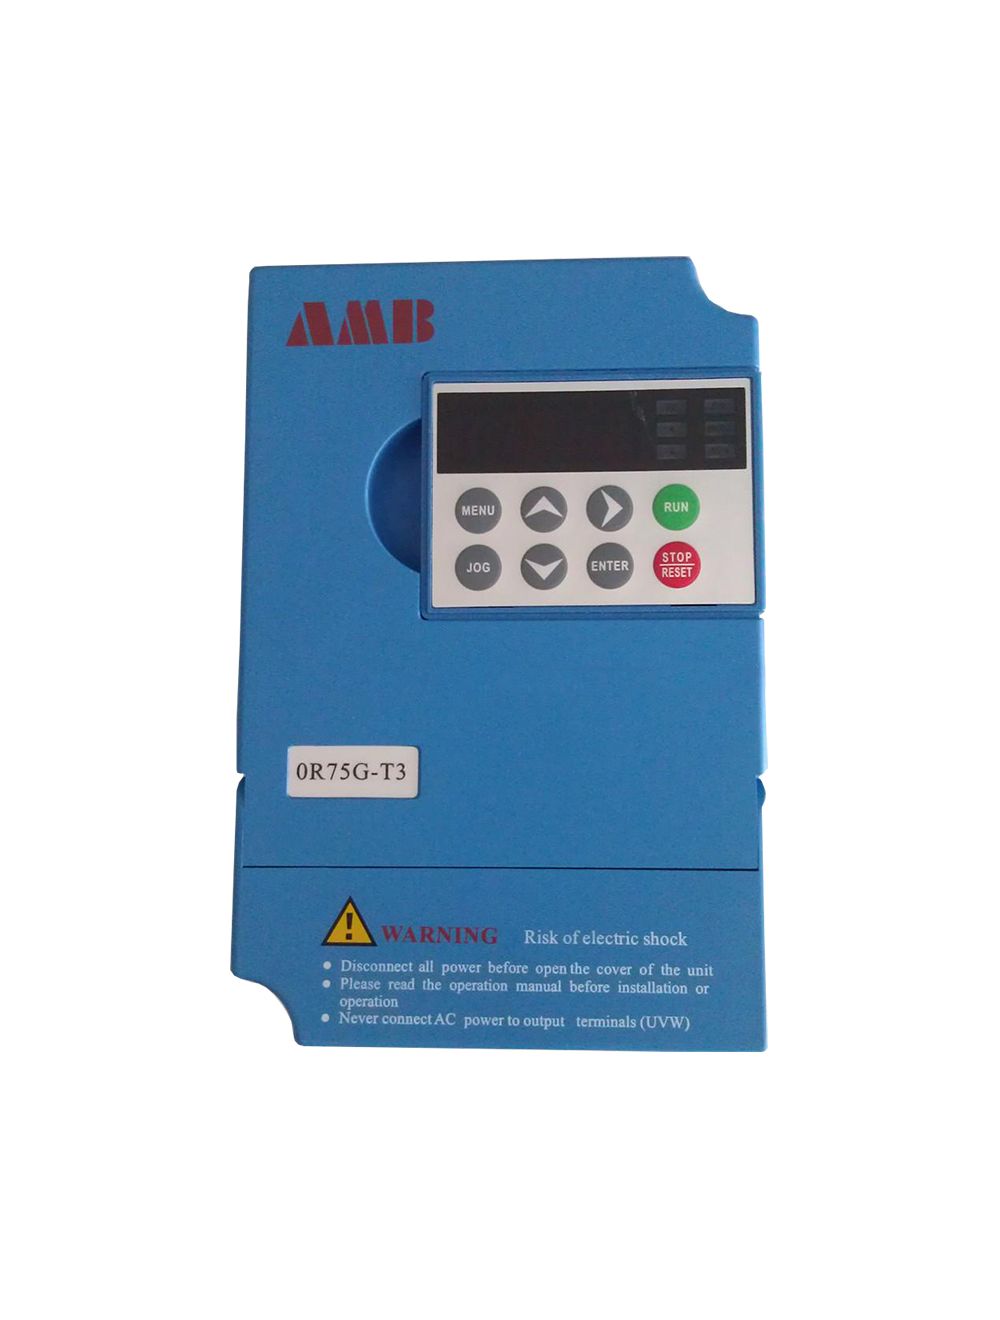 New In stock for sale, AMB VFD Frequency Converter AMB100-0R75G-T3